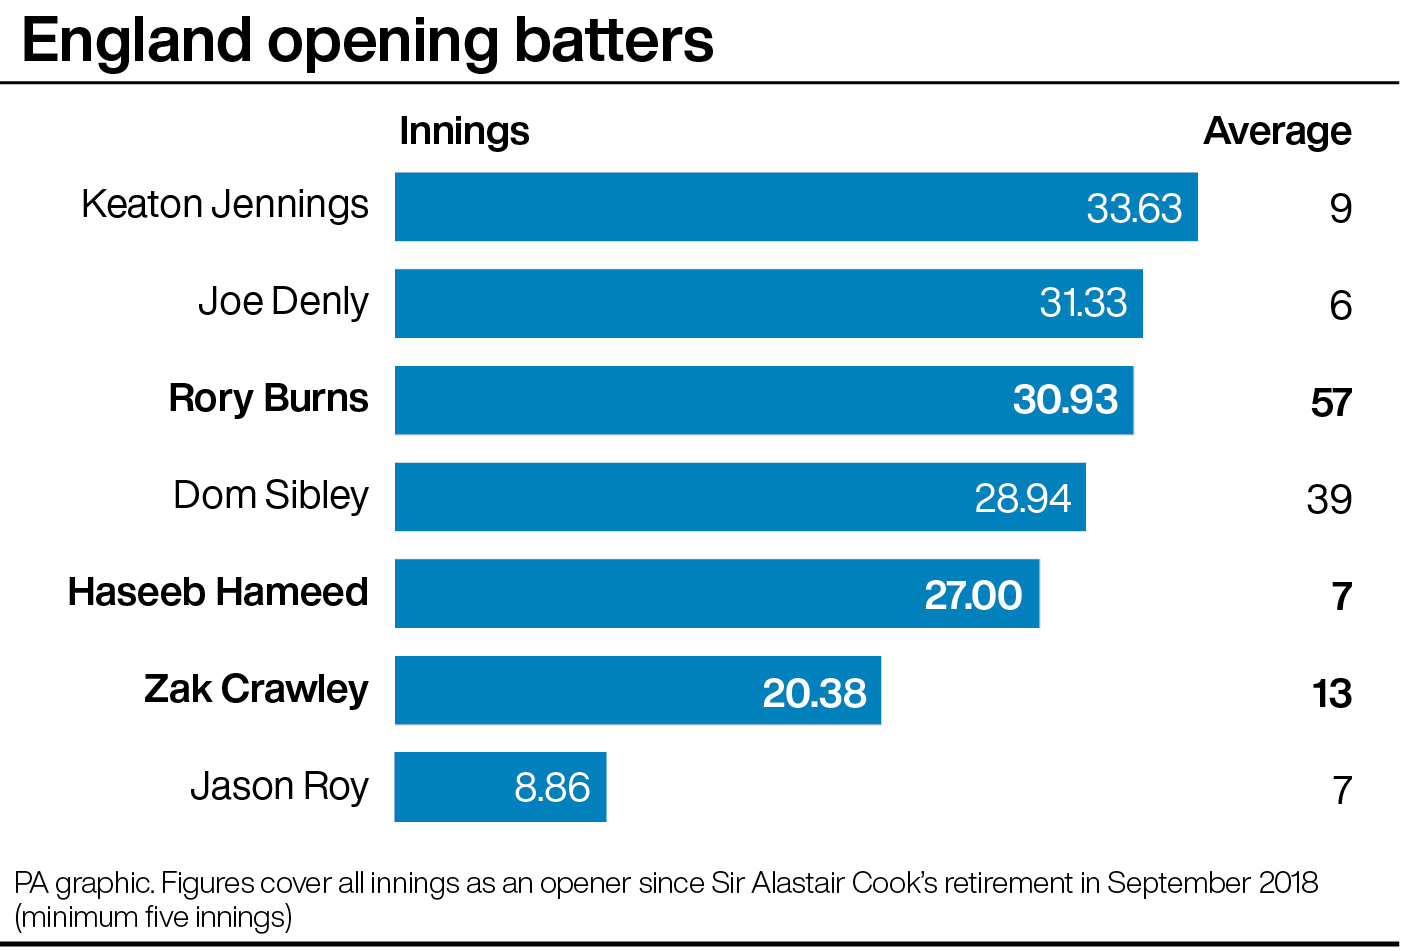 England openers since Sir Alastair Cook's retirement